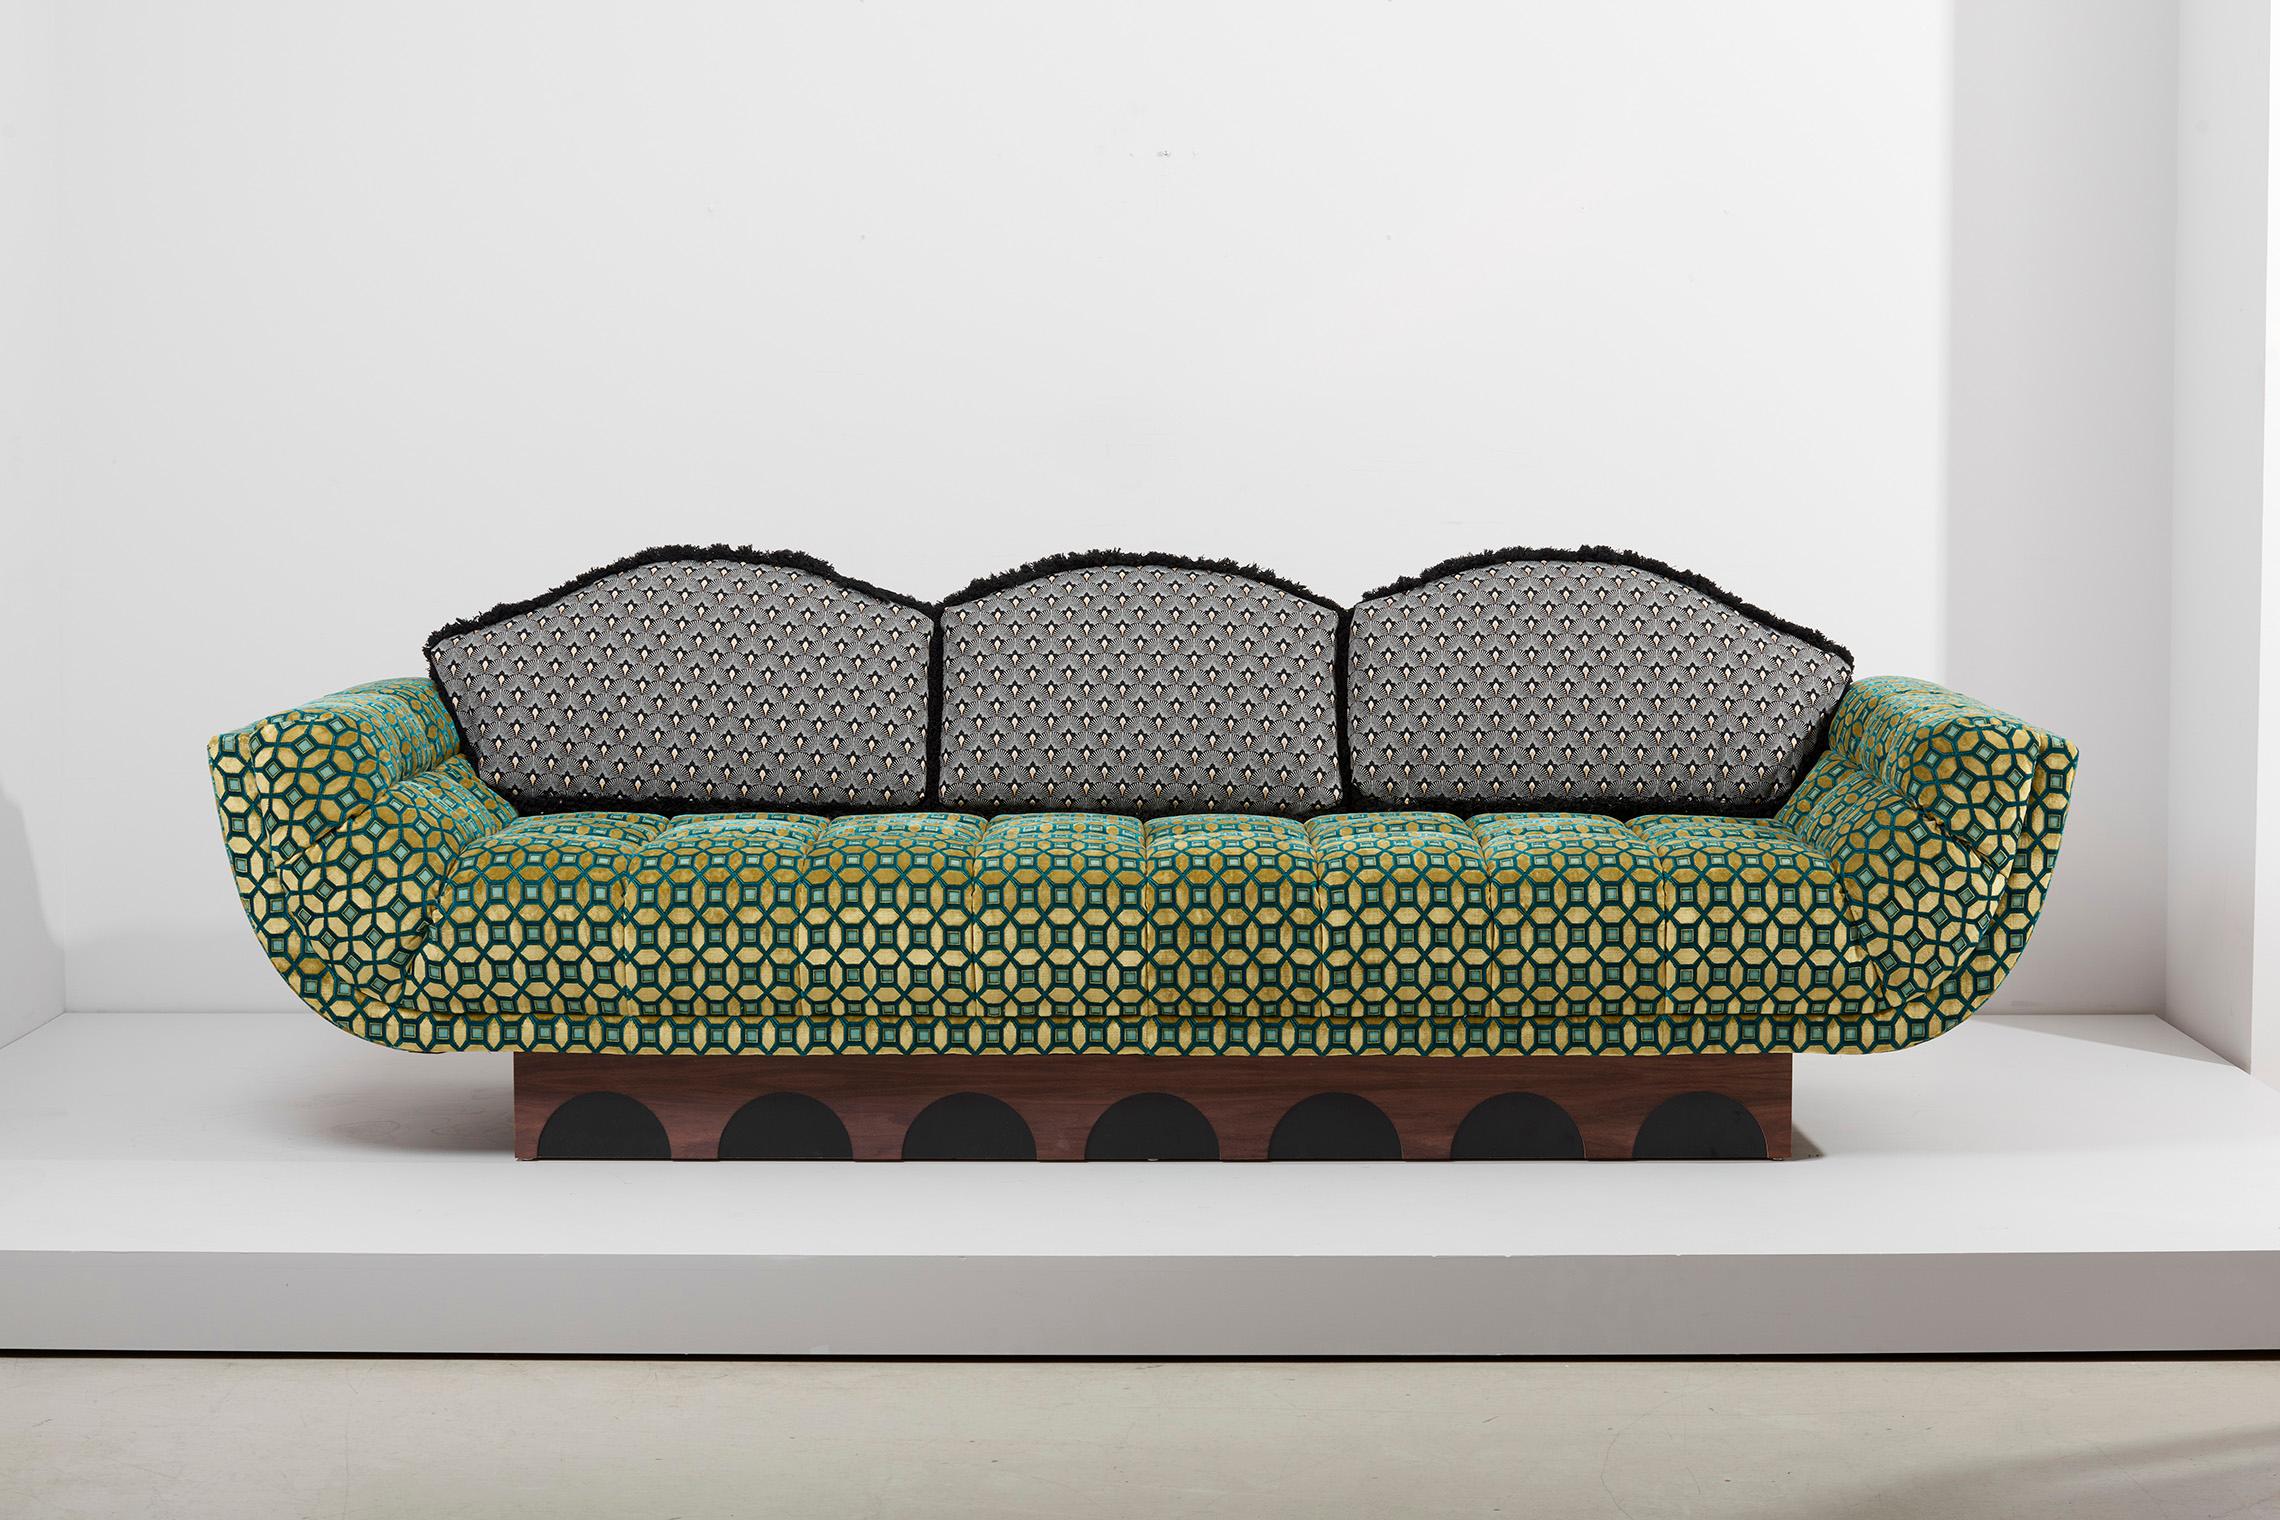 Unique Adrian Pearsall sofa from the 